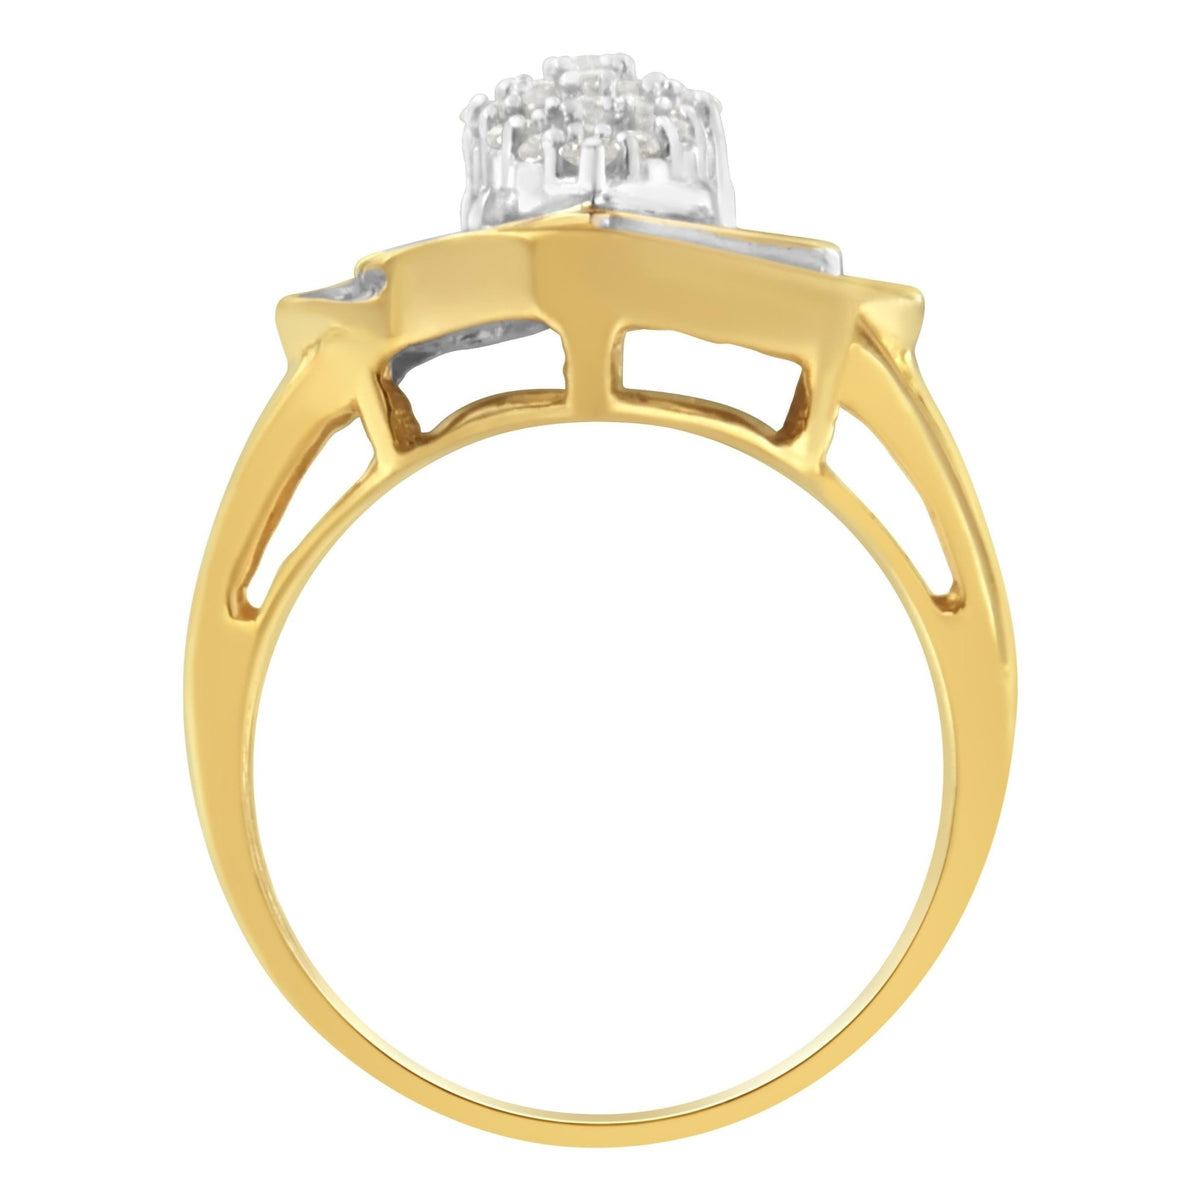 10K Yellow Gold Diamond Cluster Ring (3/4 Cttw, J-K Color, I2-I3 Clarity) - Size 6 - LinkagejewelrydesignLinkagejewelrydesign